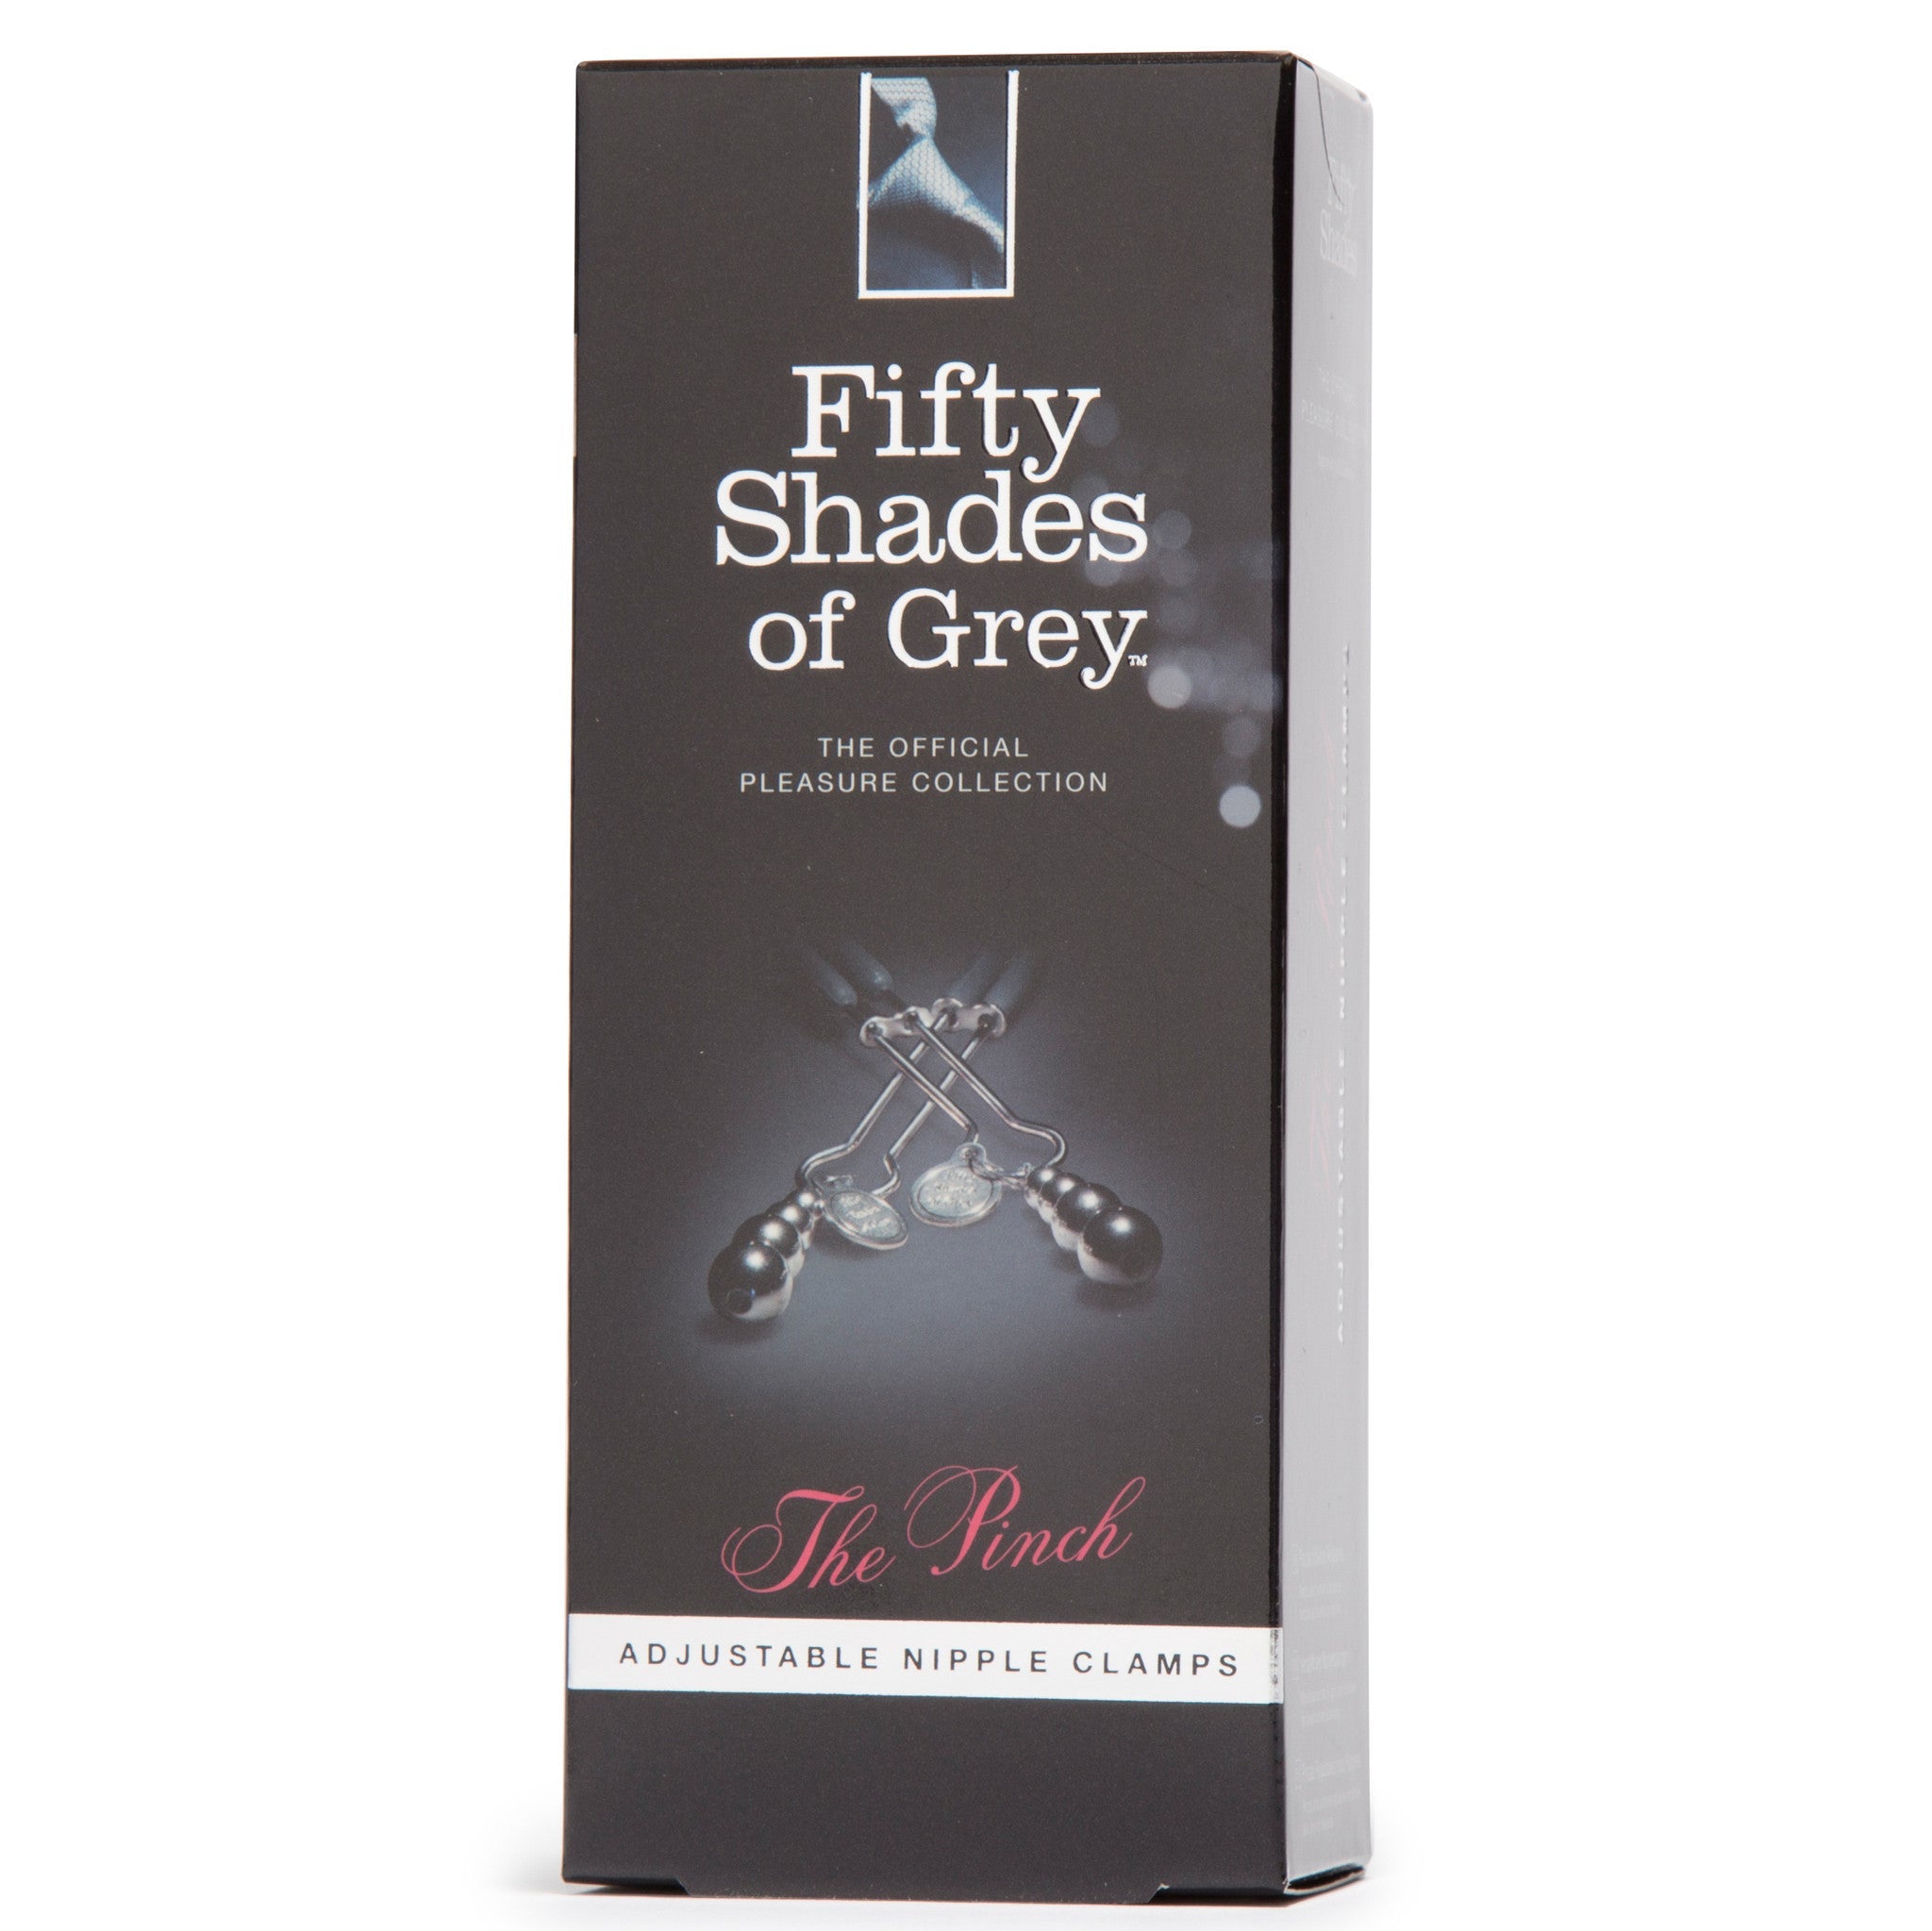  Fifty Shades of Grey - The Pinch Adjustable Nipple Clamps Nipple  Clamps (Non Vibration)